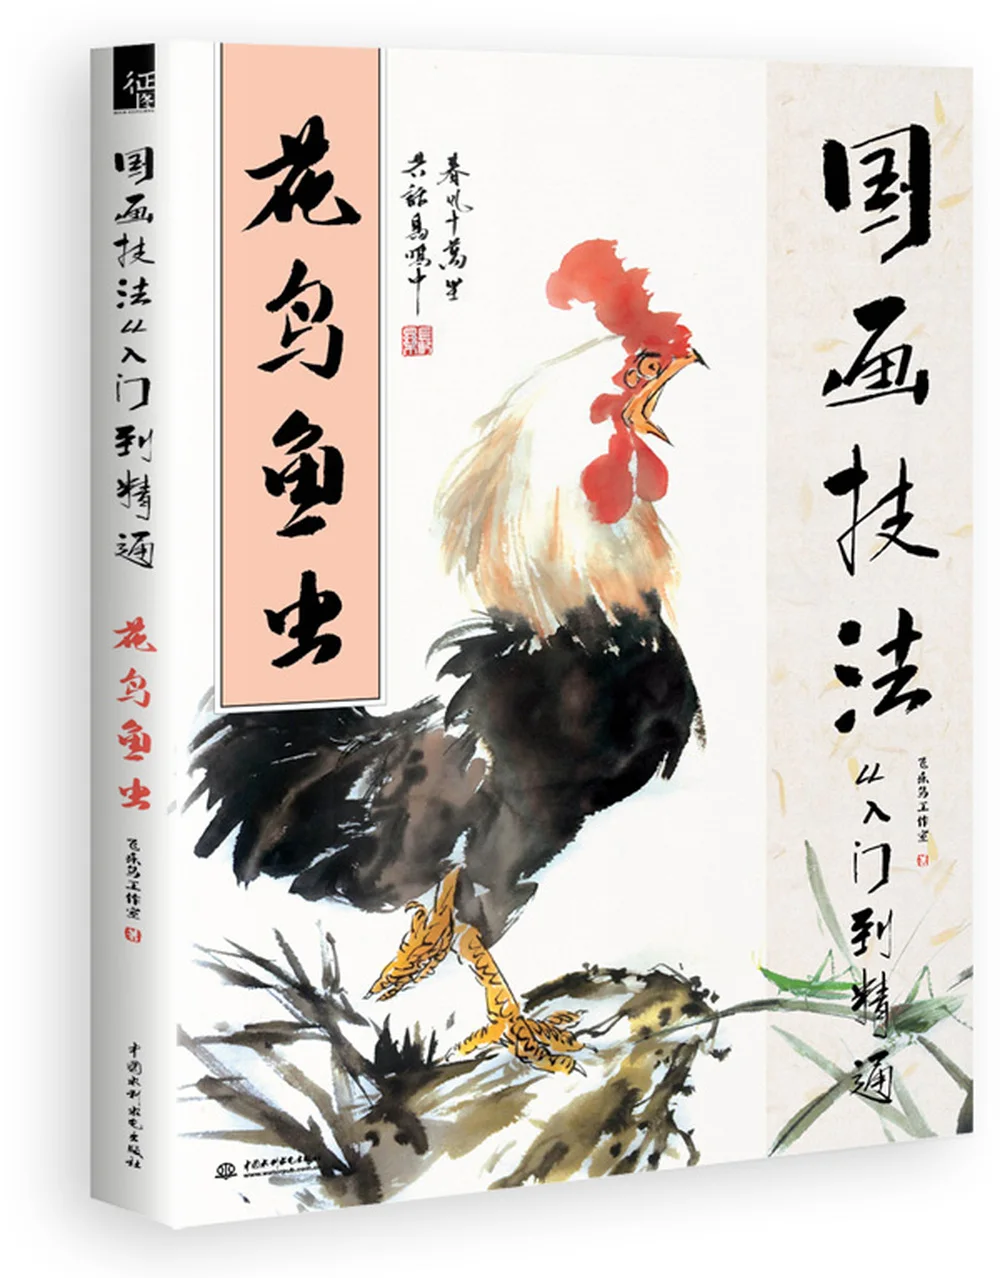 

Chinese traditional painting art book Chinese painting techniques from entry to proficiency